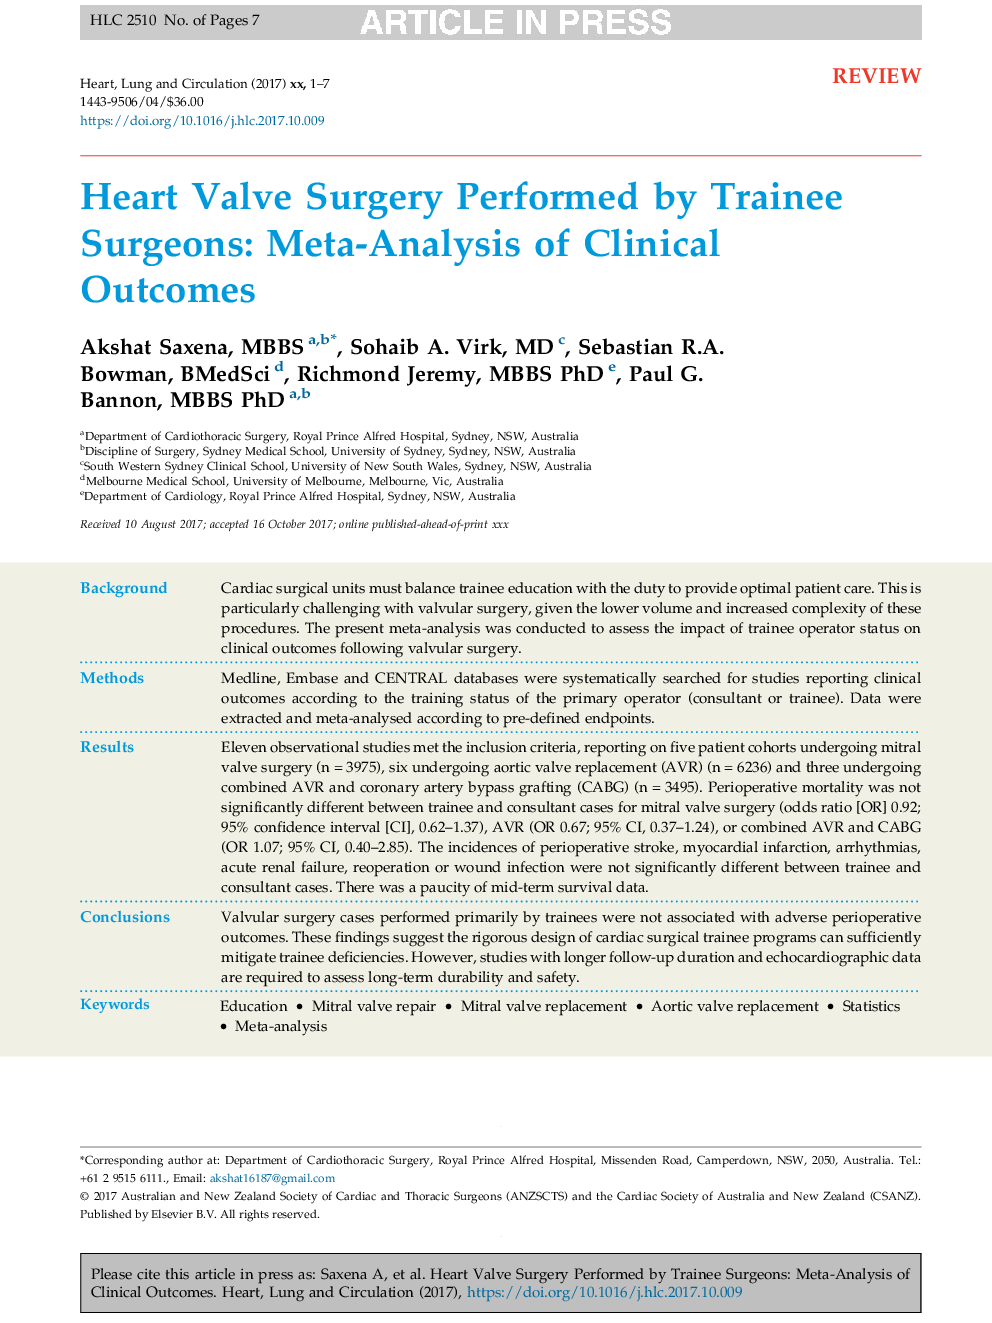 Heart Valve Surgery Performed by Trainee Surgeons: Meta-Analysis of Clinical Outcomes